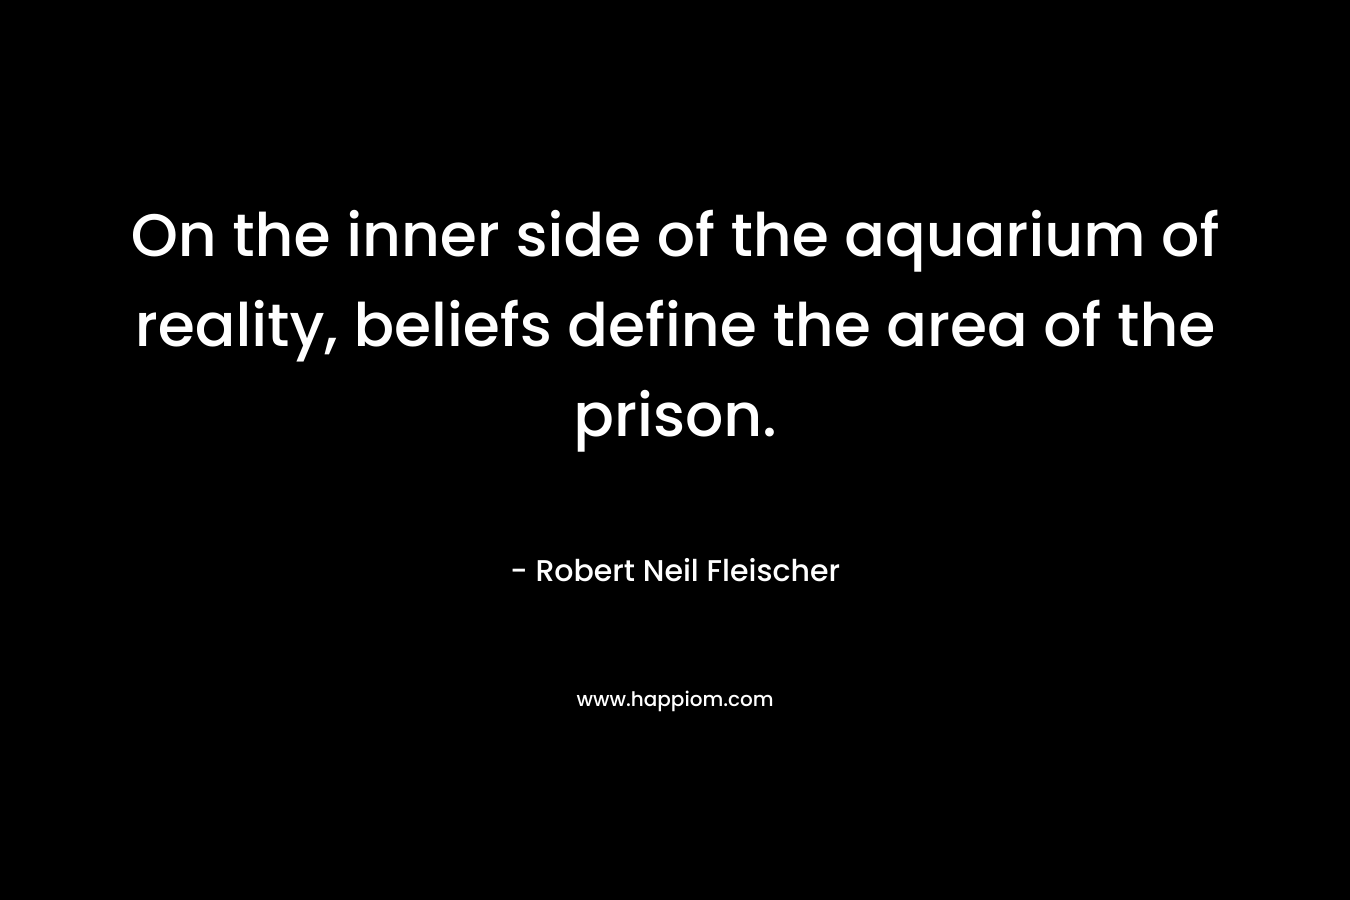 On the inner side of the aquarium of reality, beliefs define the area of the prison. – Robert Neil Fleischer